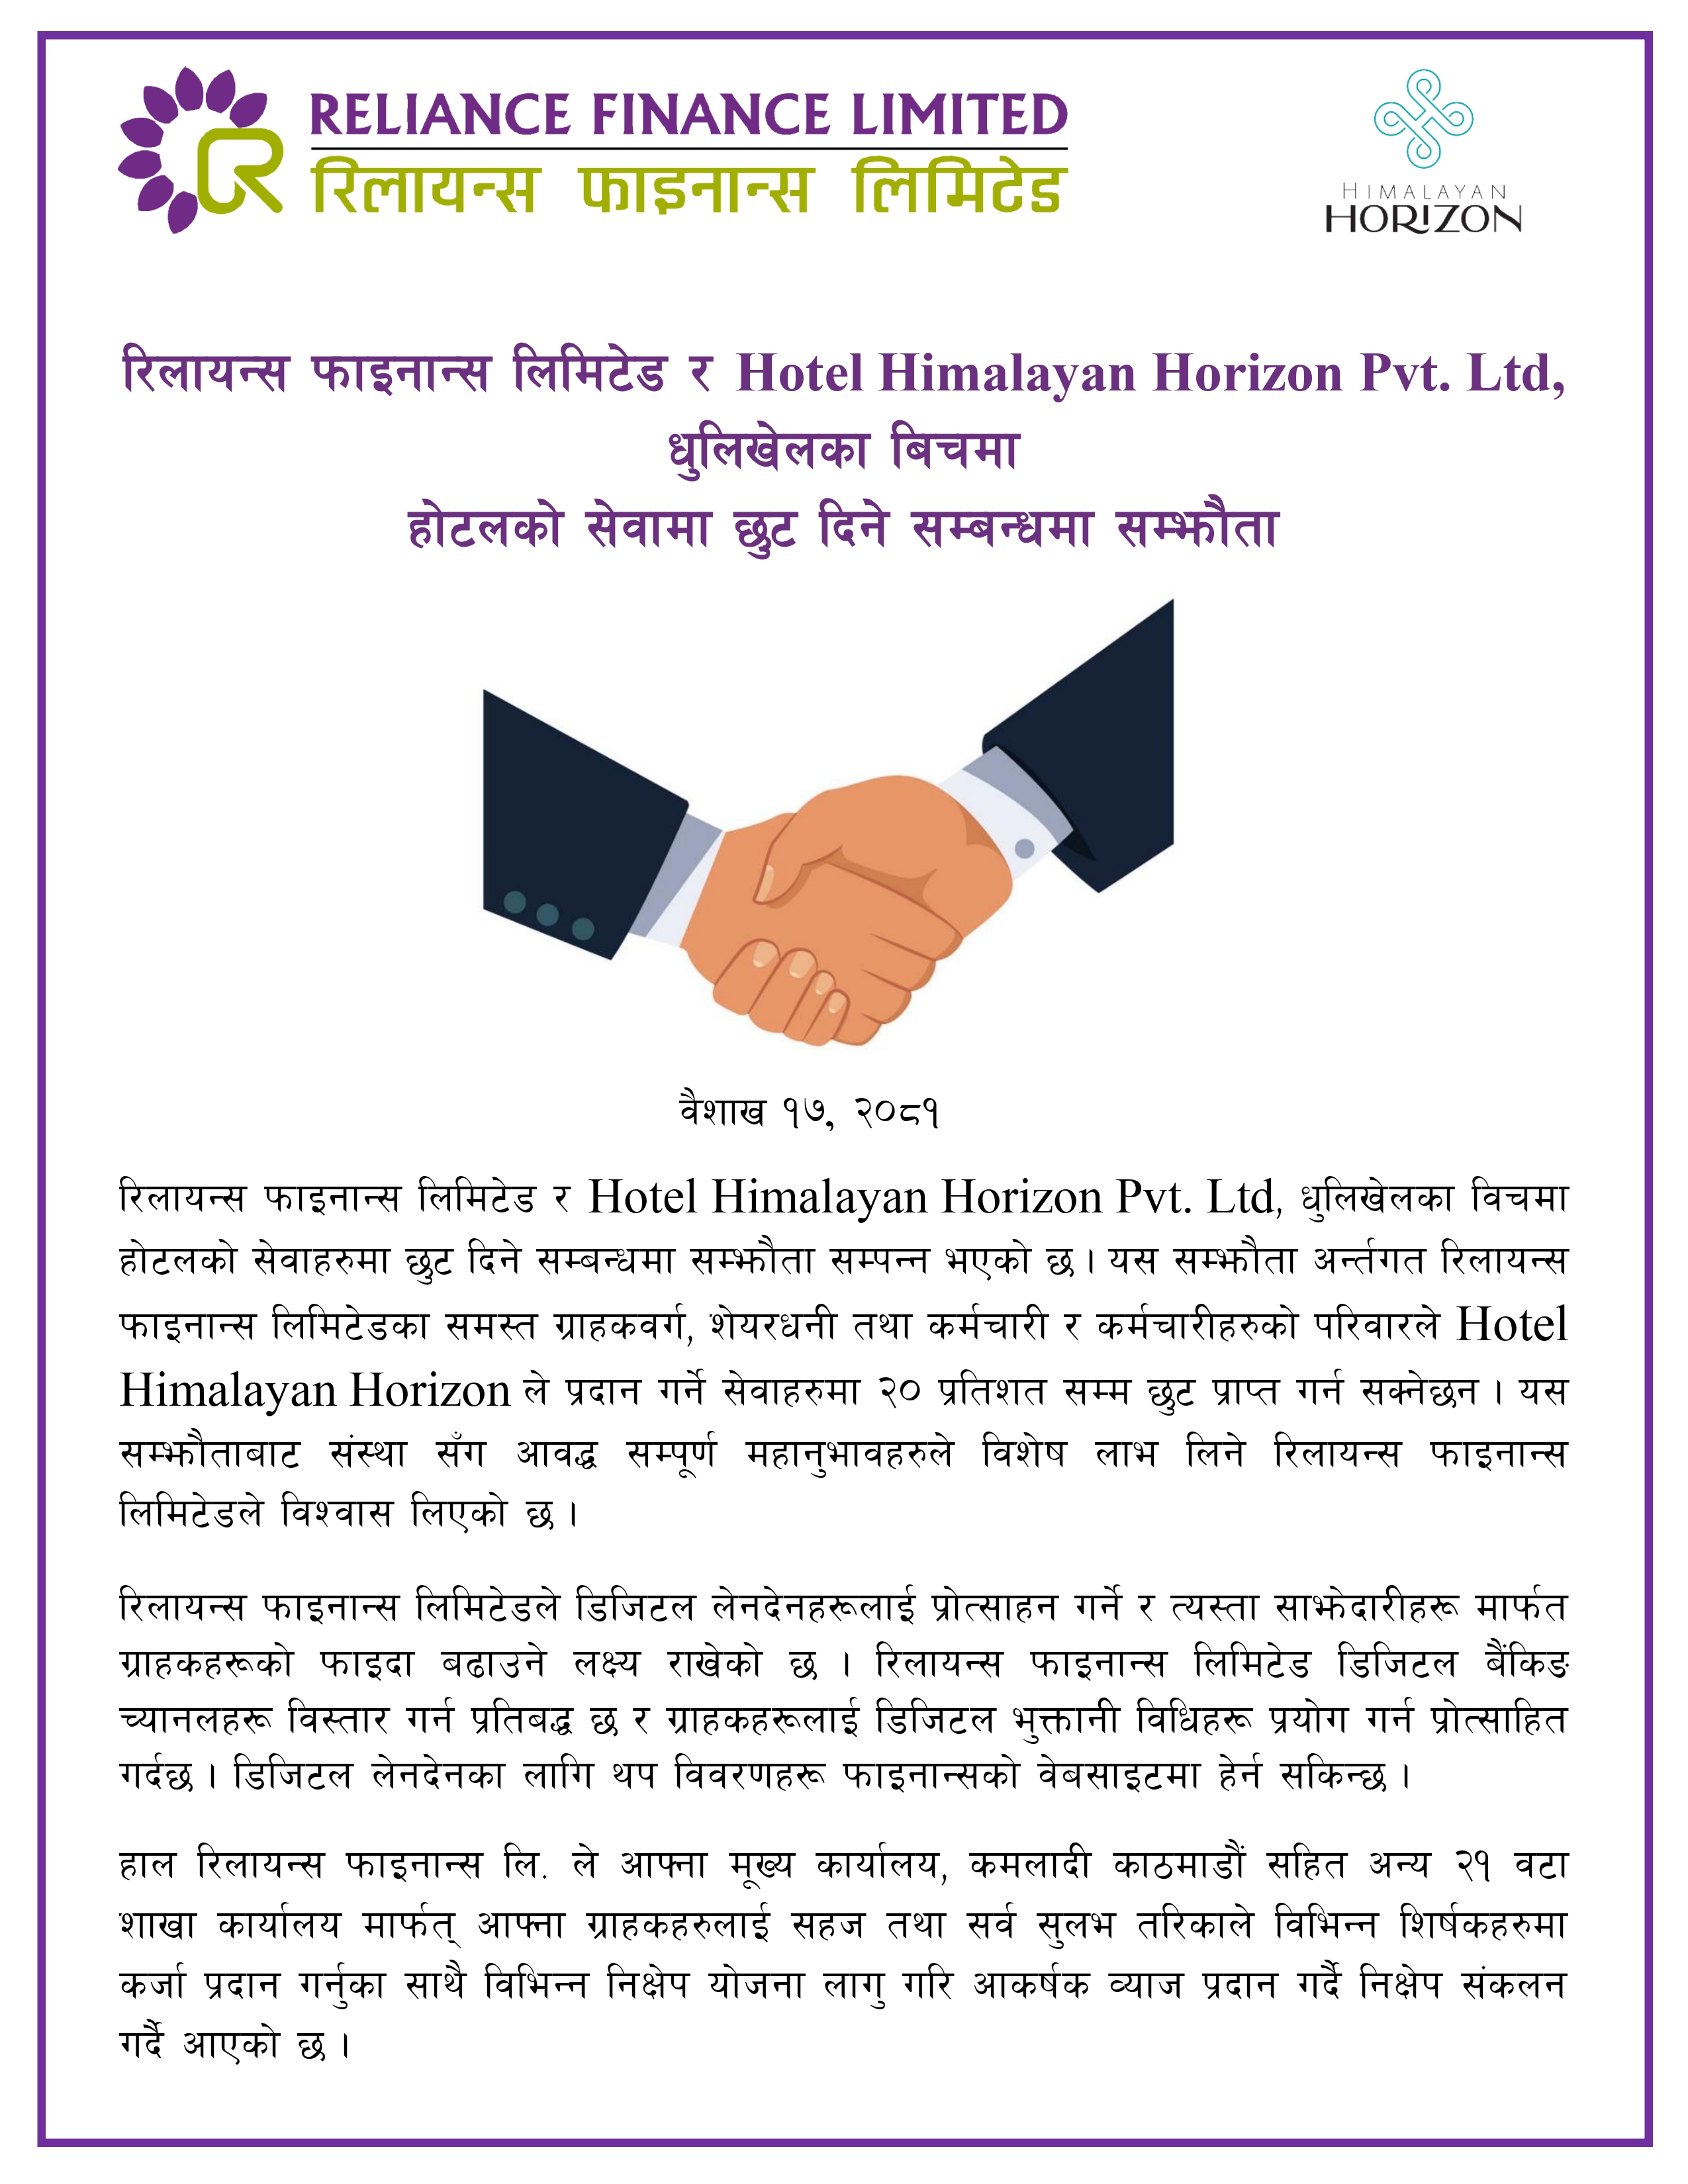 Reliance Finance Limited and Himalyan Horizon Forge Agreement for Exclusive Discounts on Hotel Services.